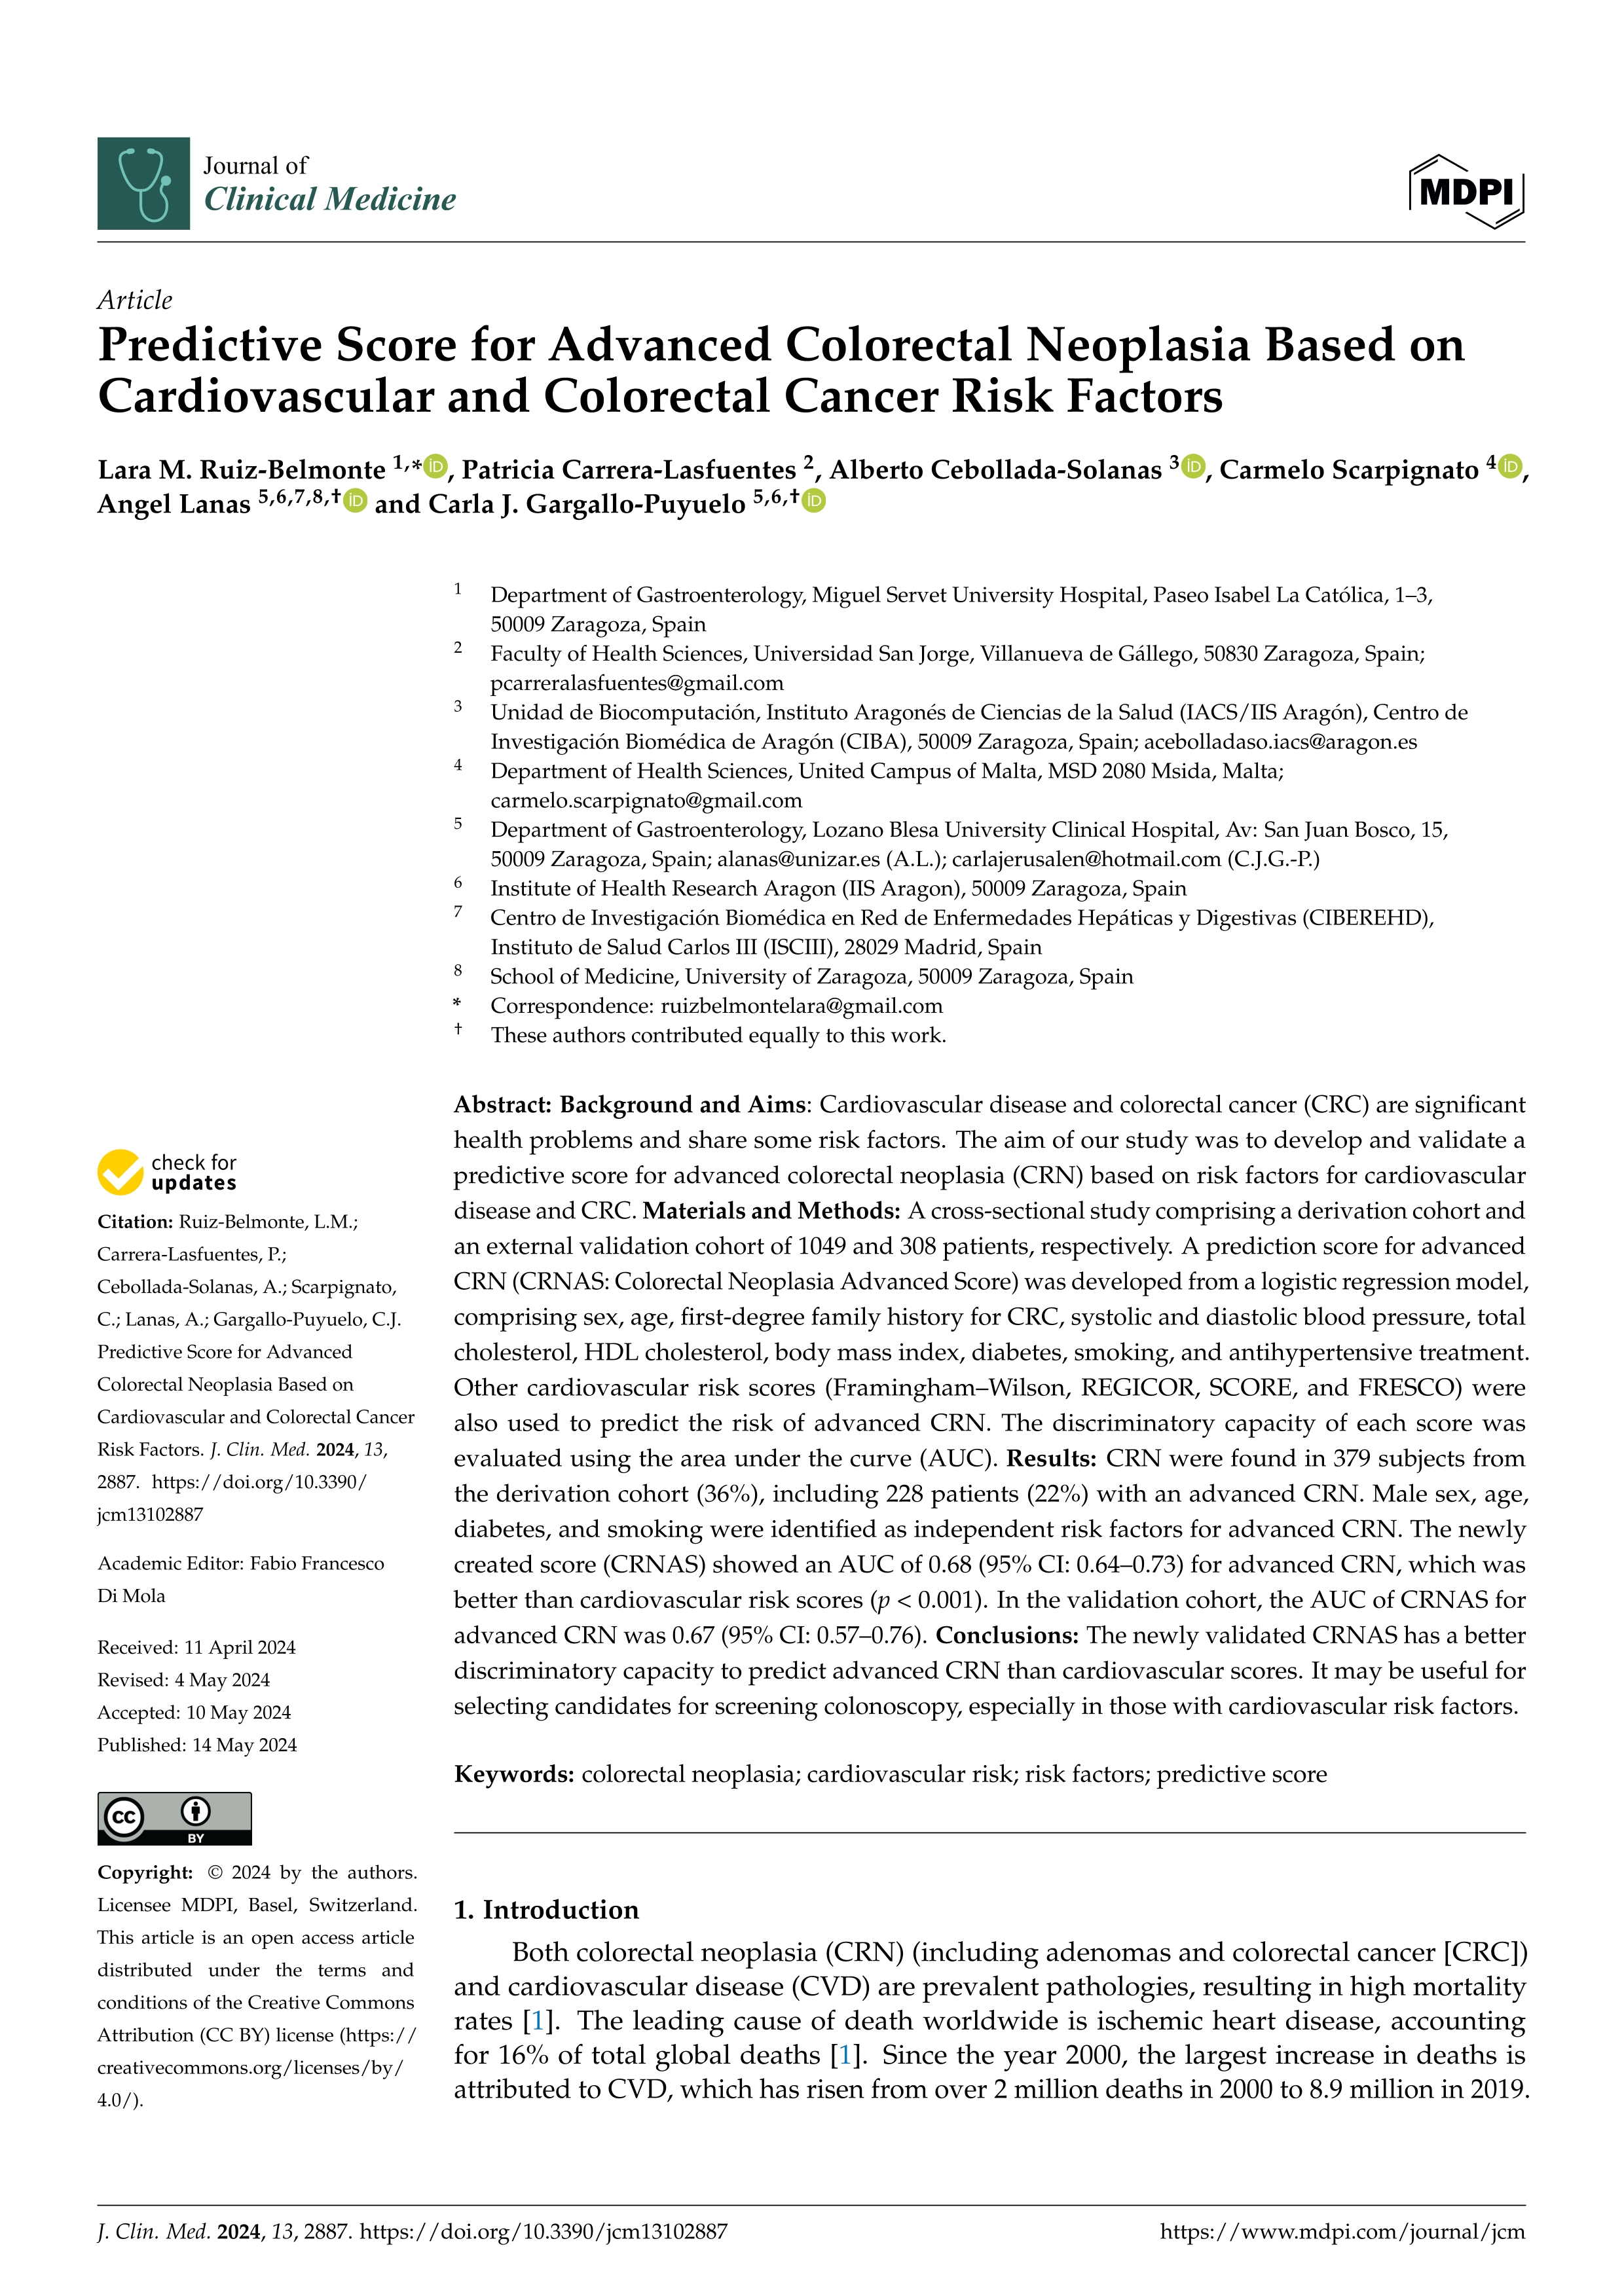 Predictive score for advanced colorectal neoplasia based on cardiovascular and colorectal cancer risk factors